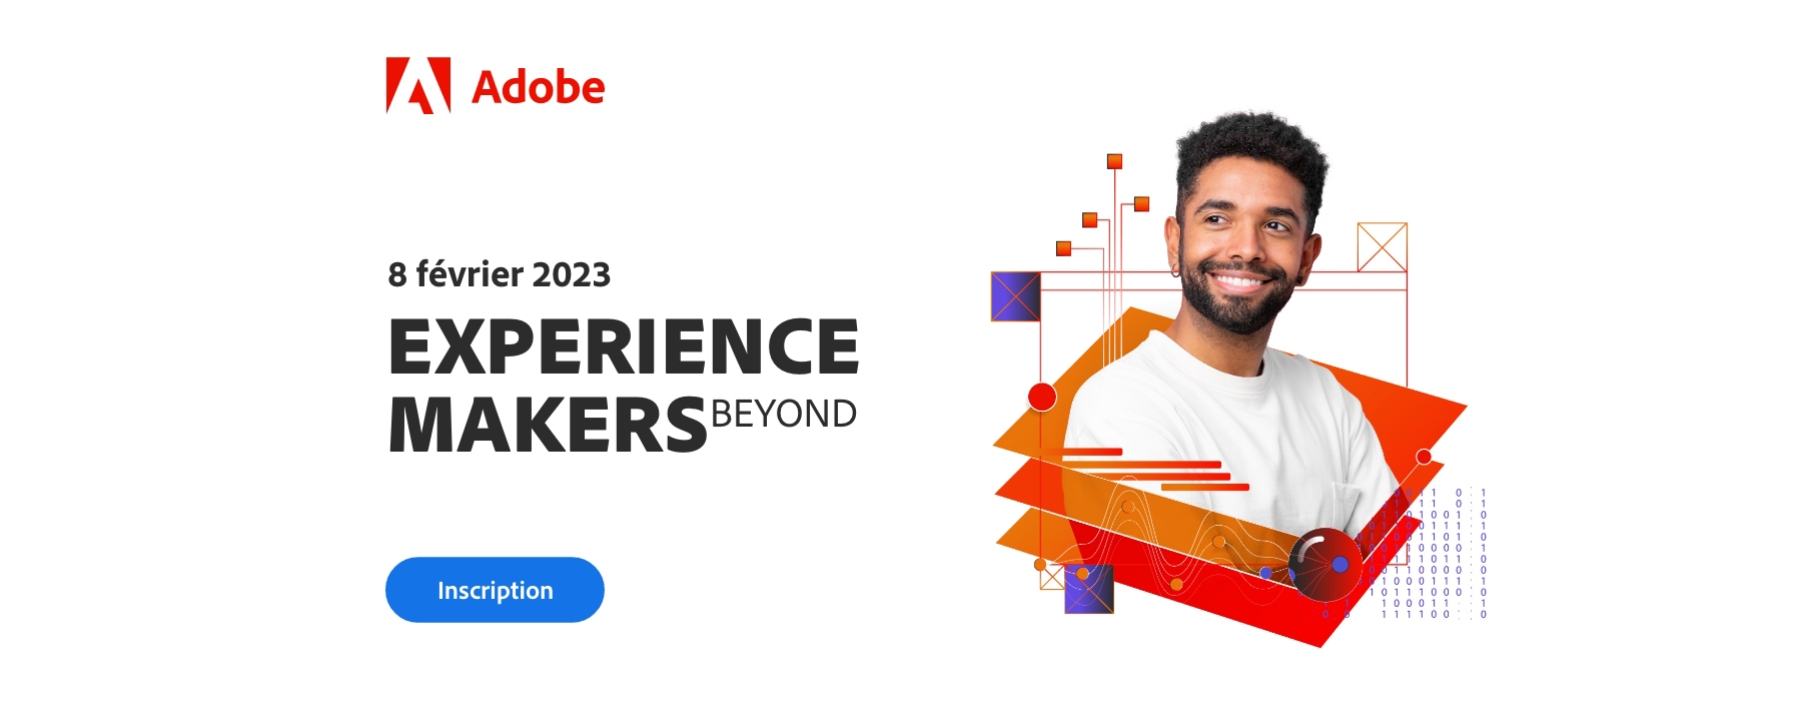 Adobe Experience Makers Beyond